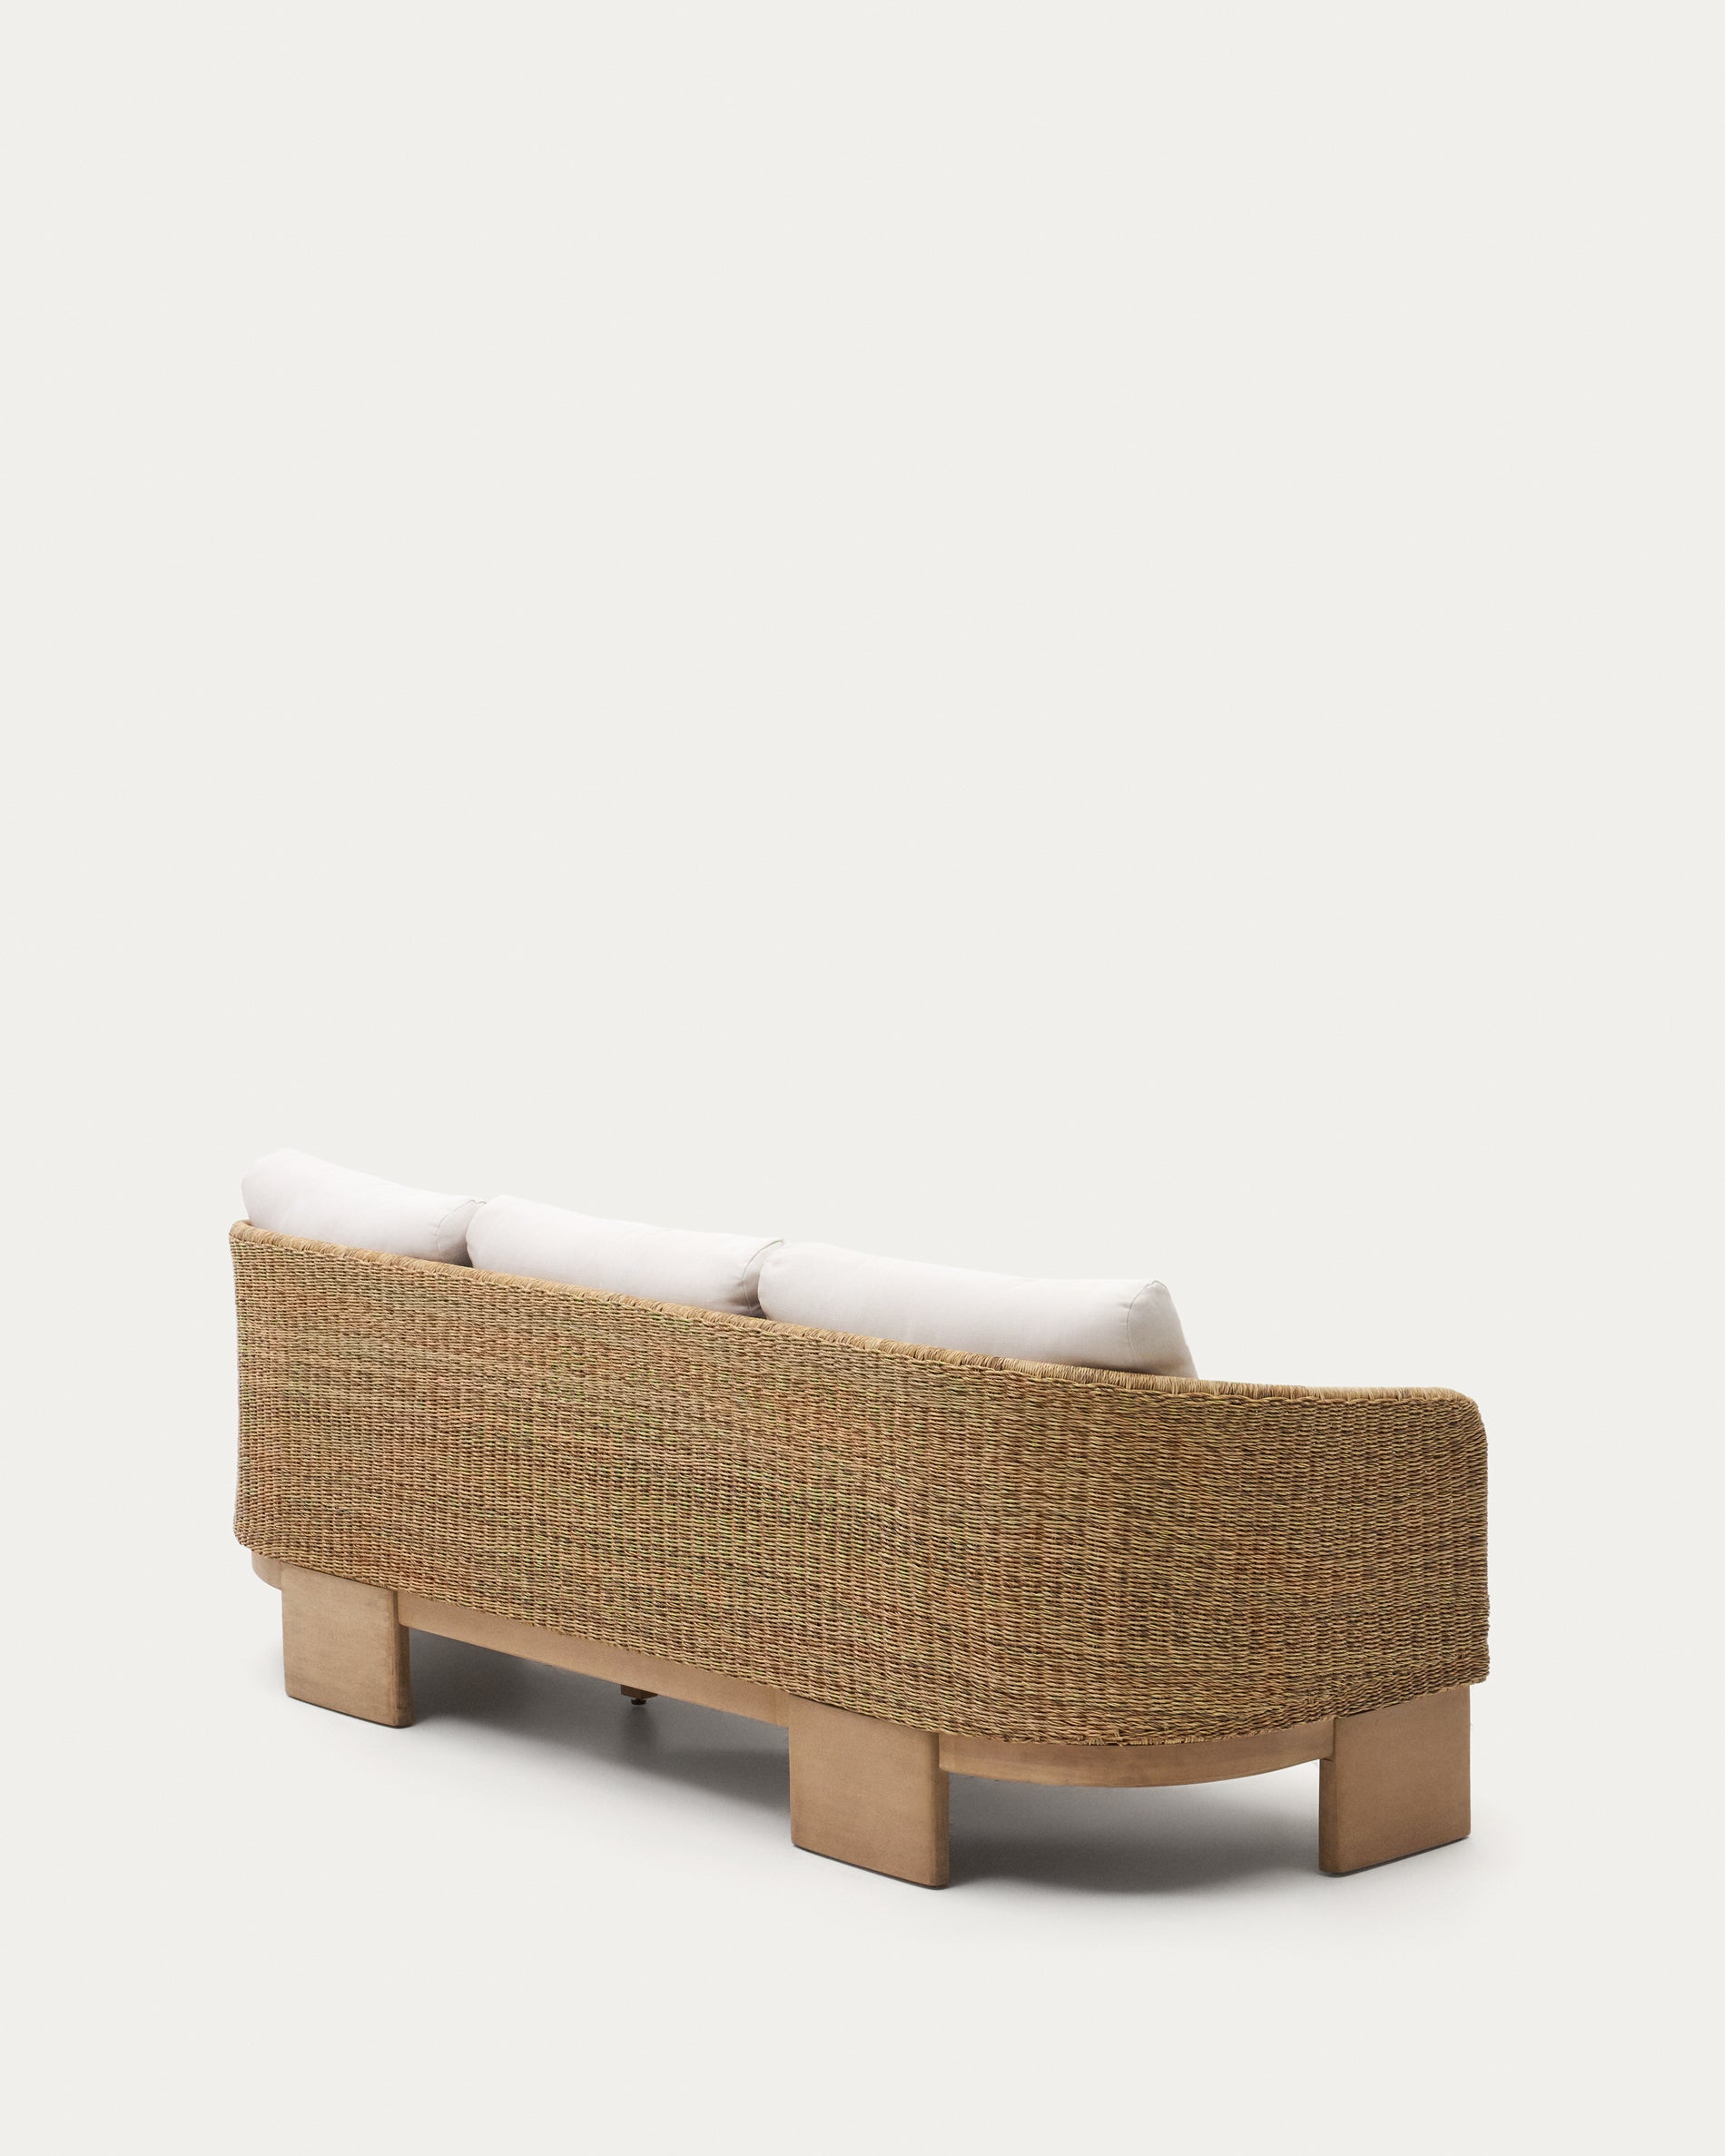 Xoriguer 3-seater sofa in artificial rattan and 100% FSC certified solid eucalyptus wood, 223 cm